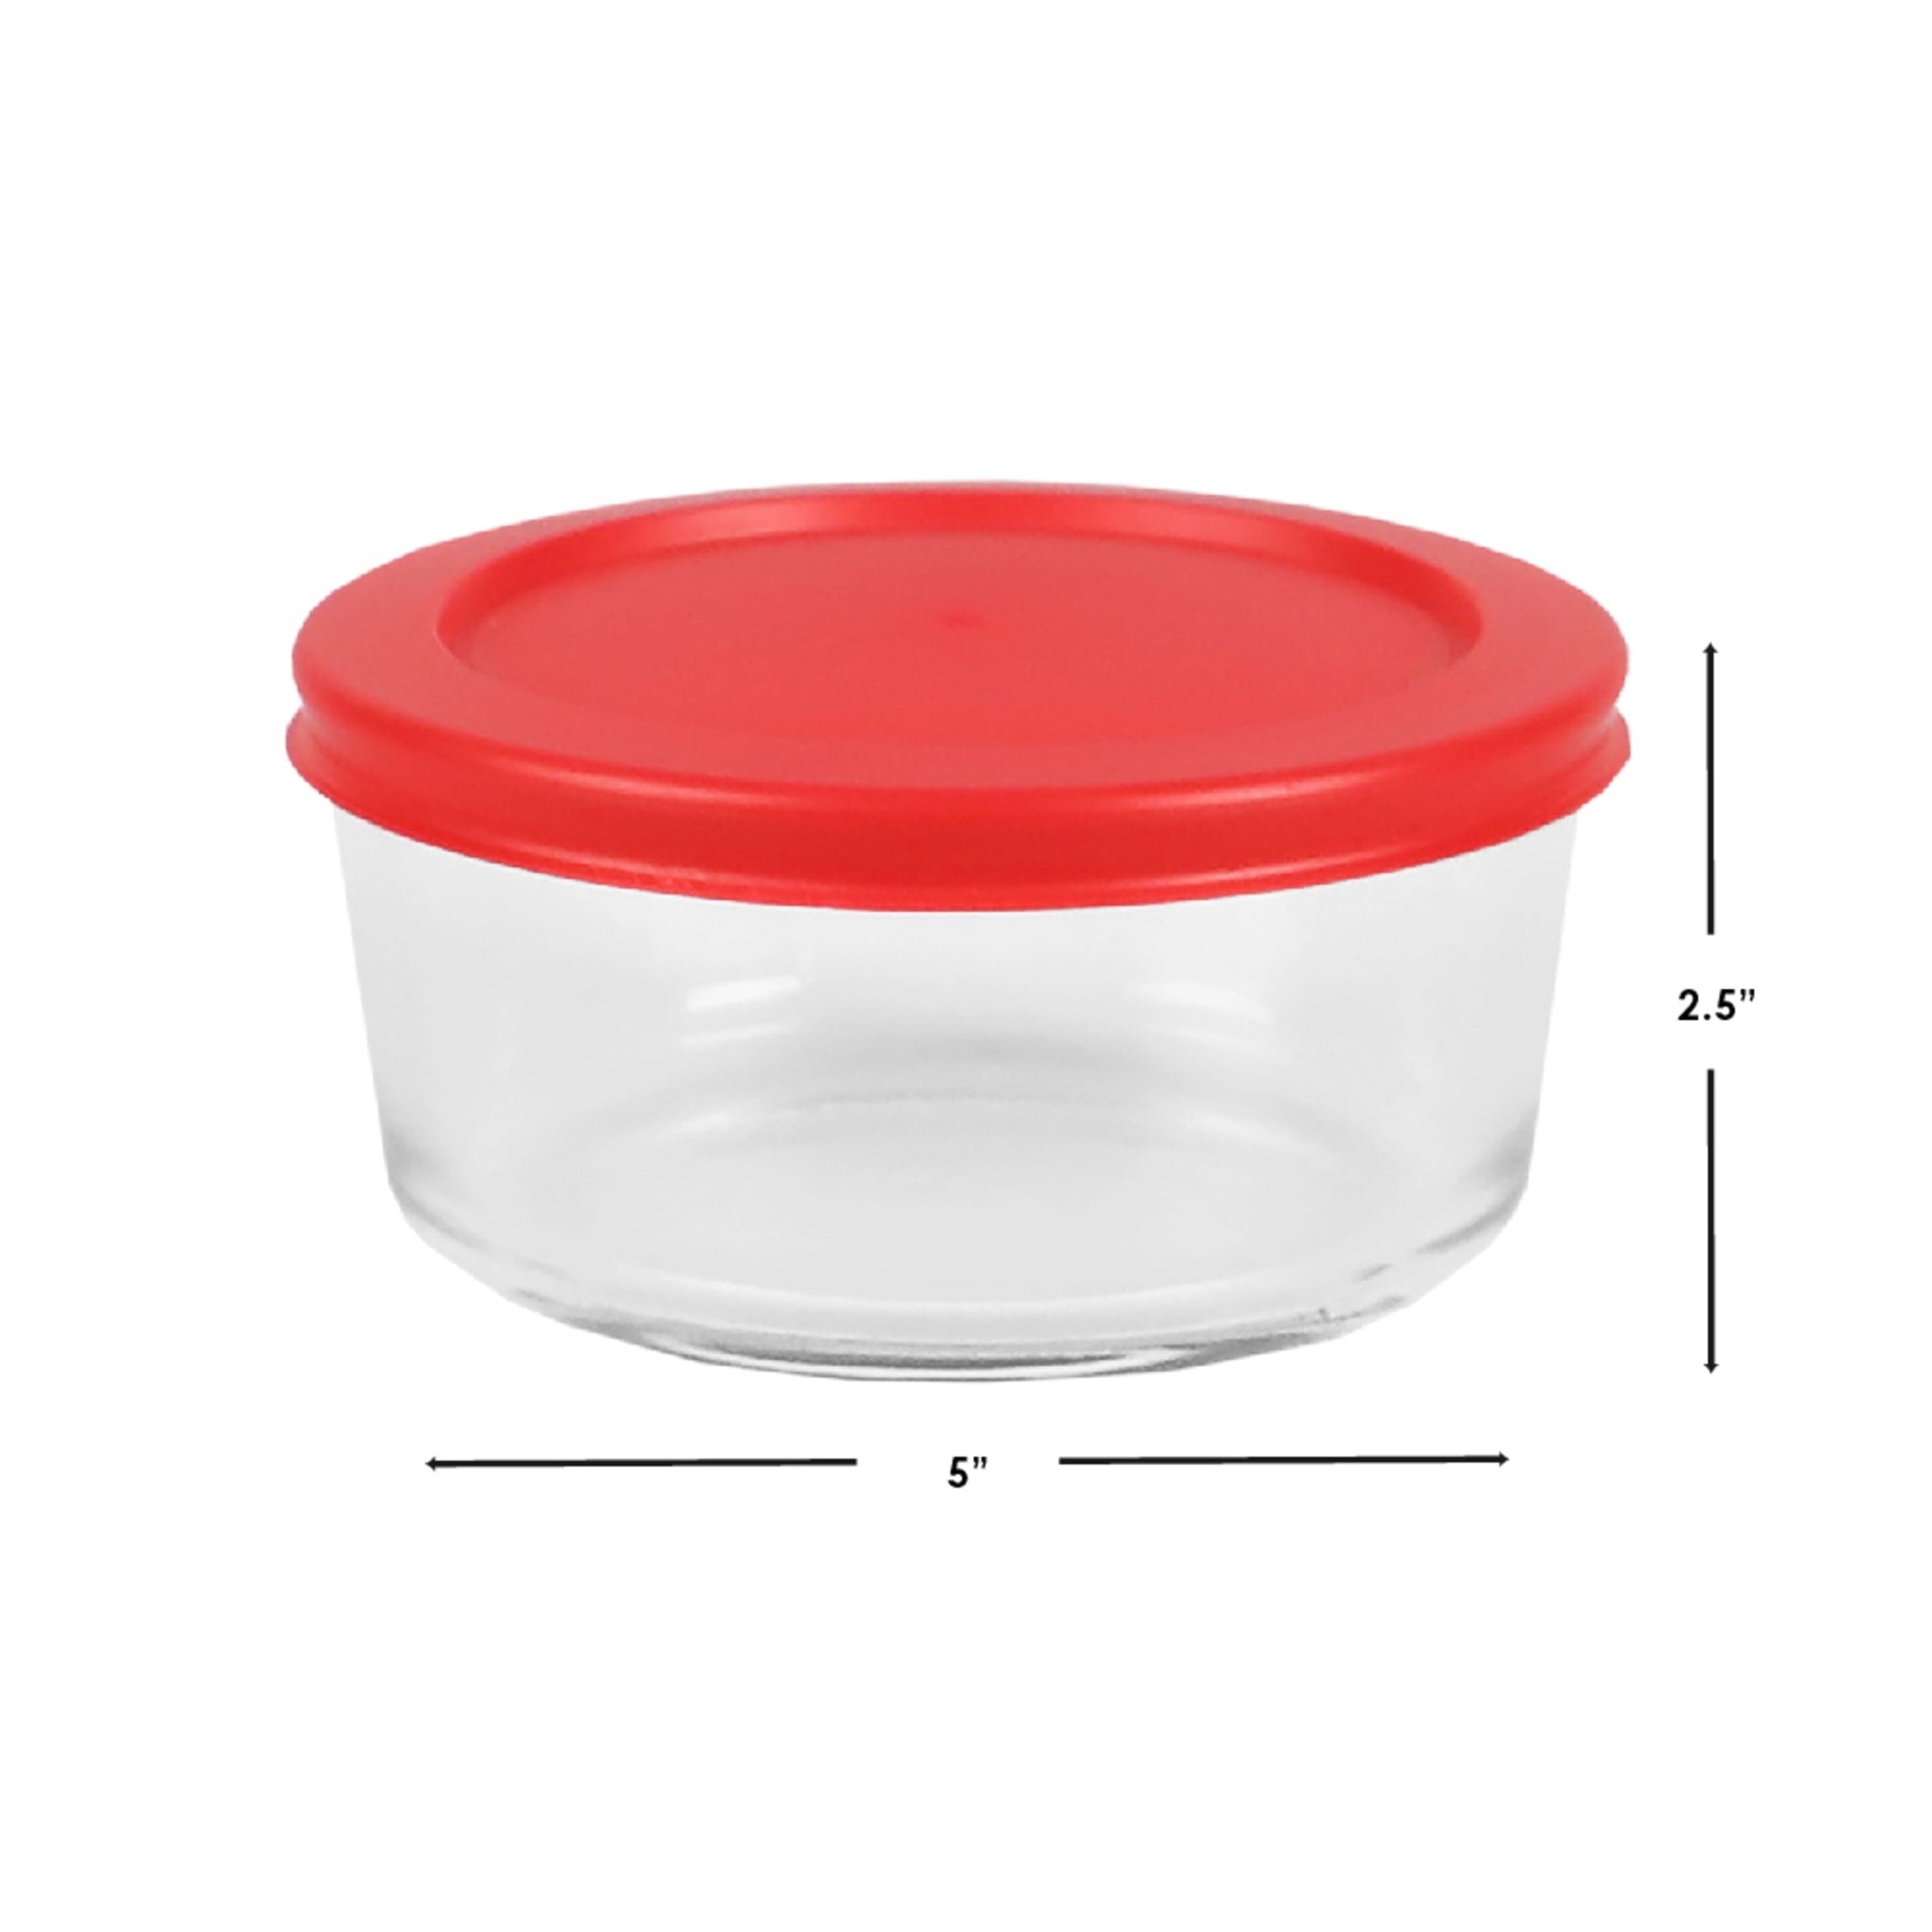 Home Basics 16 oz. Round Glass Food Storage Container with Red Lid, Clear $3.00 EACH, CASE PACK OF 12